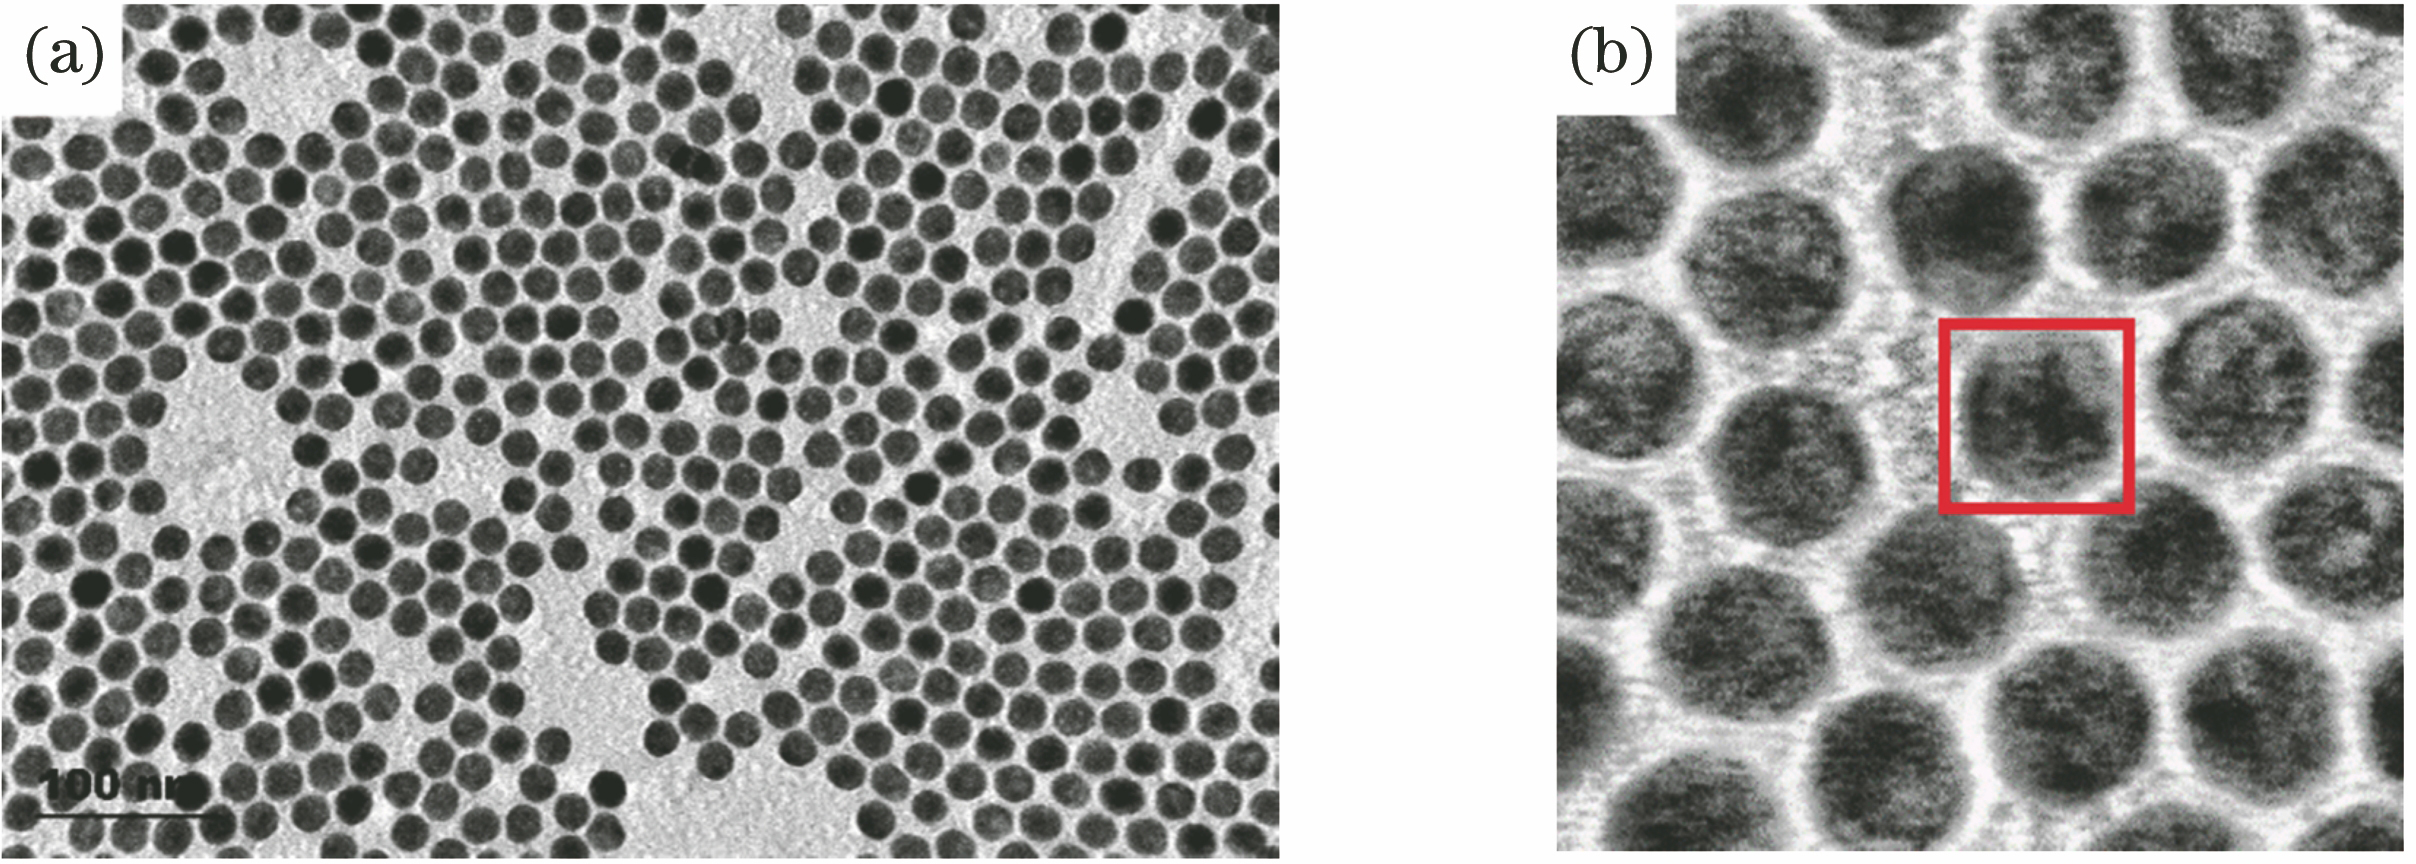 Spherical nanoparticle image taken by TEM and its partially enlarged view. (a) TEM image; (b) partially enlarged view